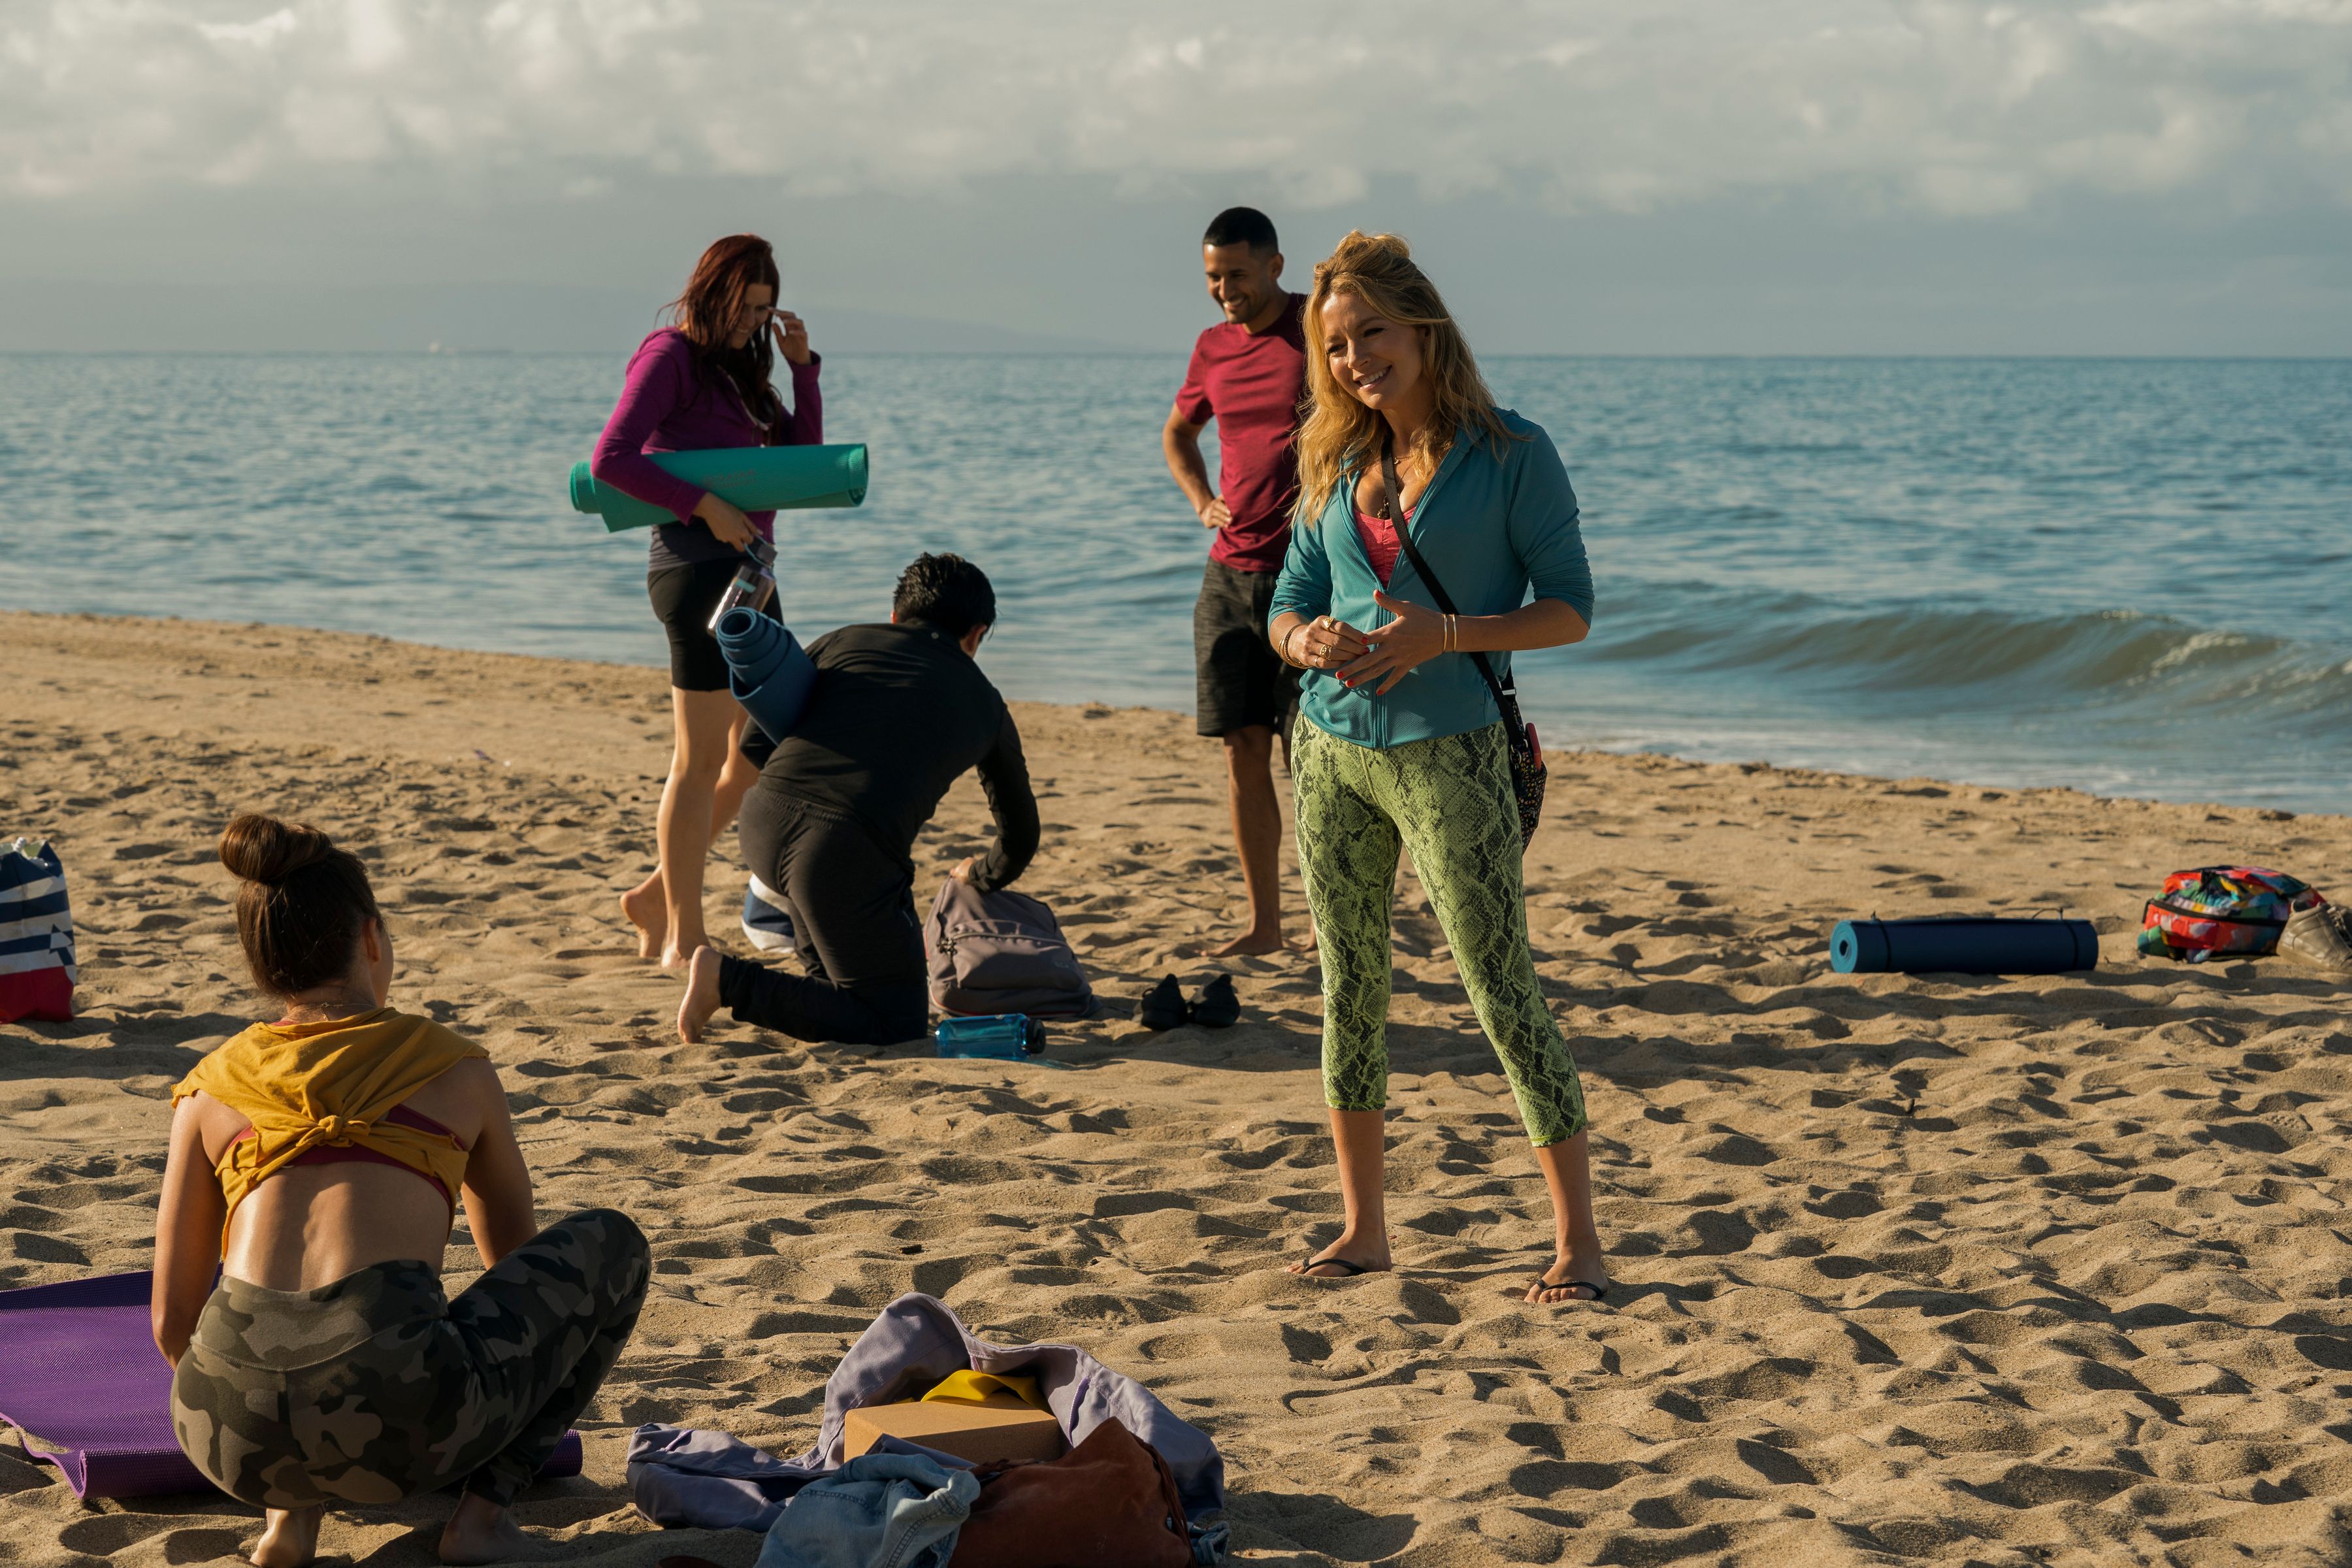 Actress Becki Newton has a conversation on the beach in a scene from The Lincoln Lawyer TV show